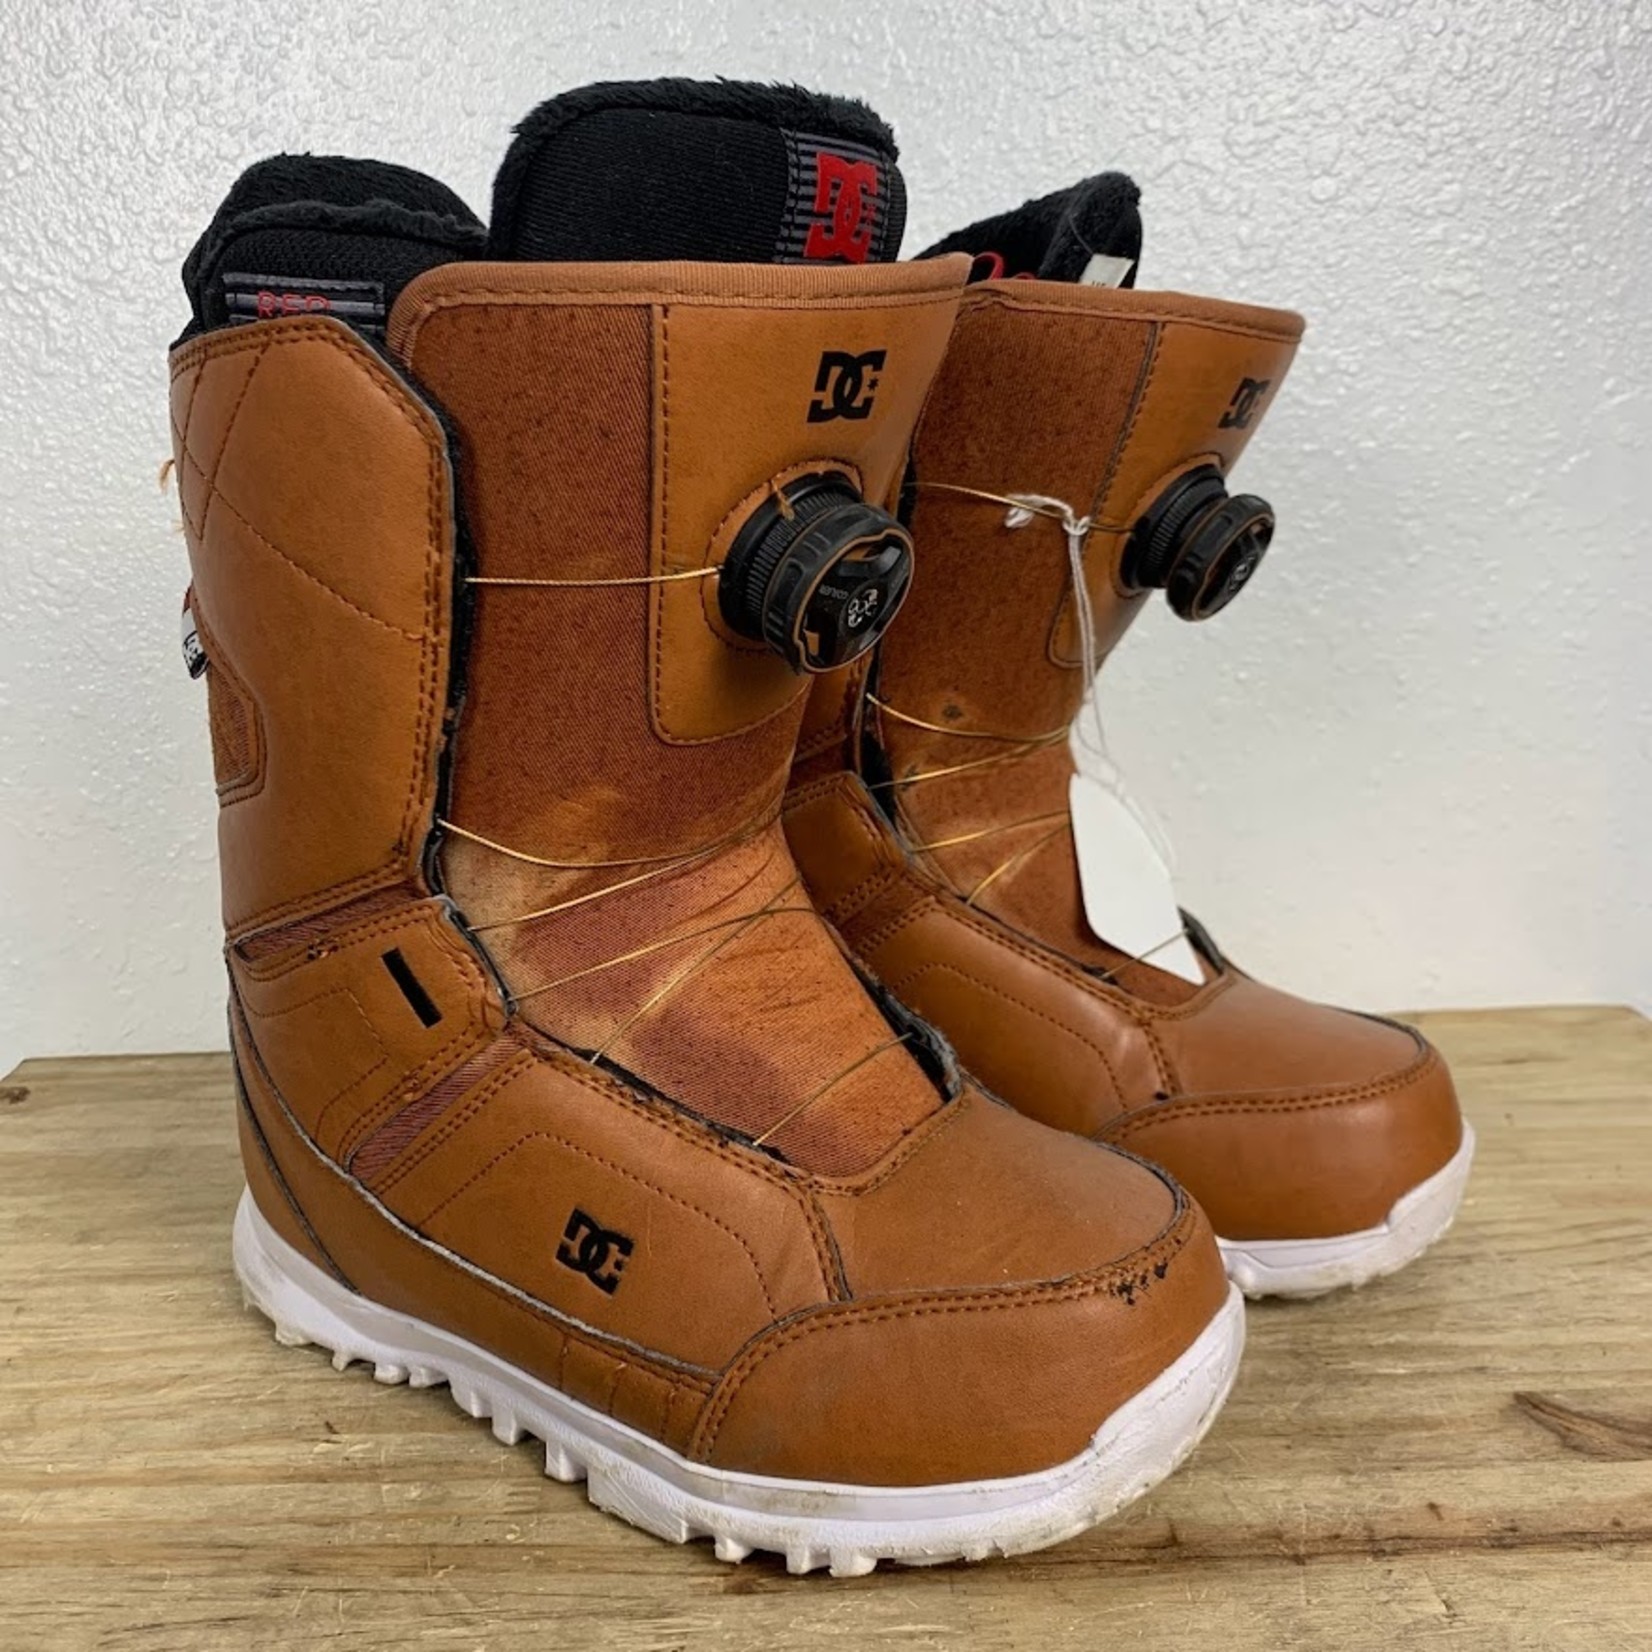 DC 2018 DC Search Boa Snowboard Boots, Size 6 WMNS